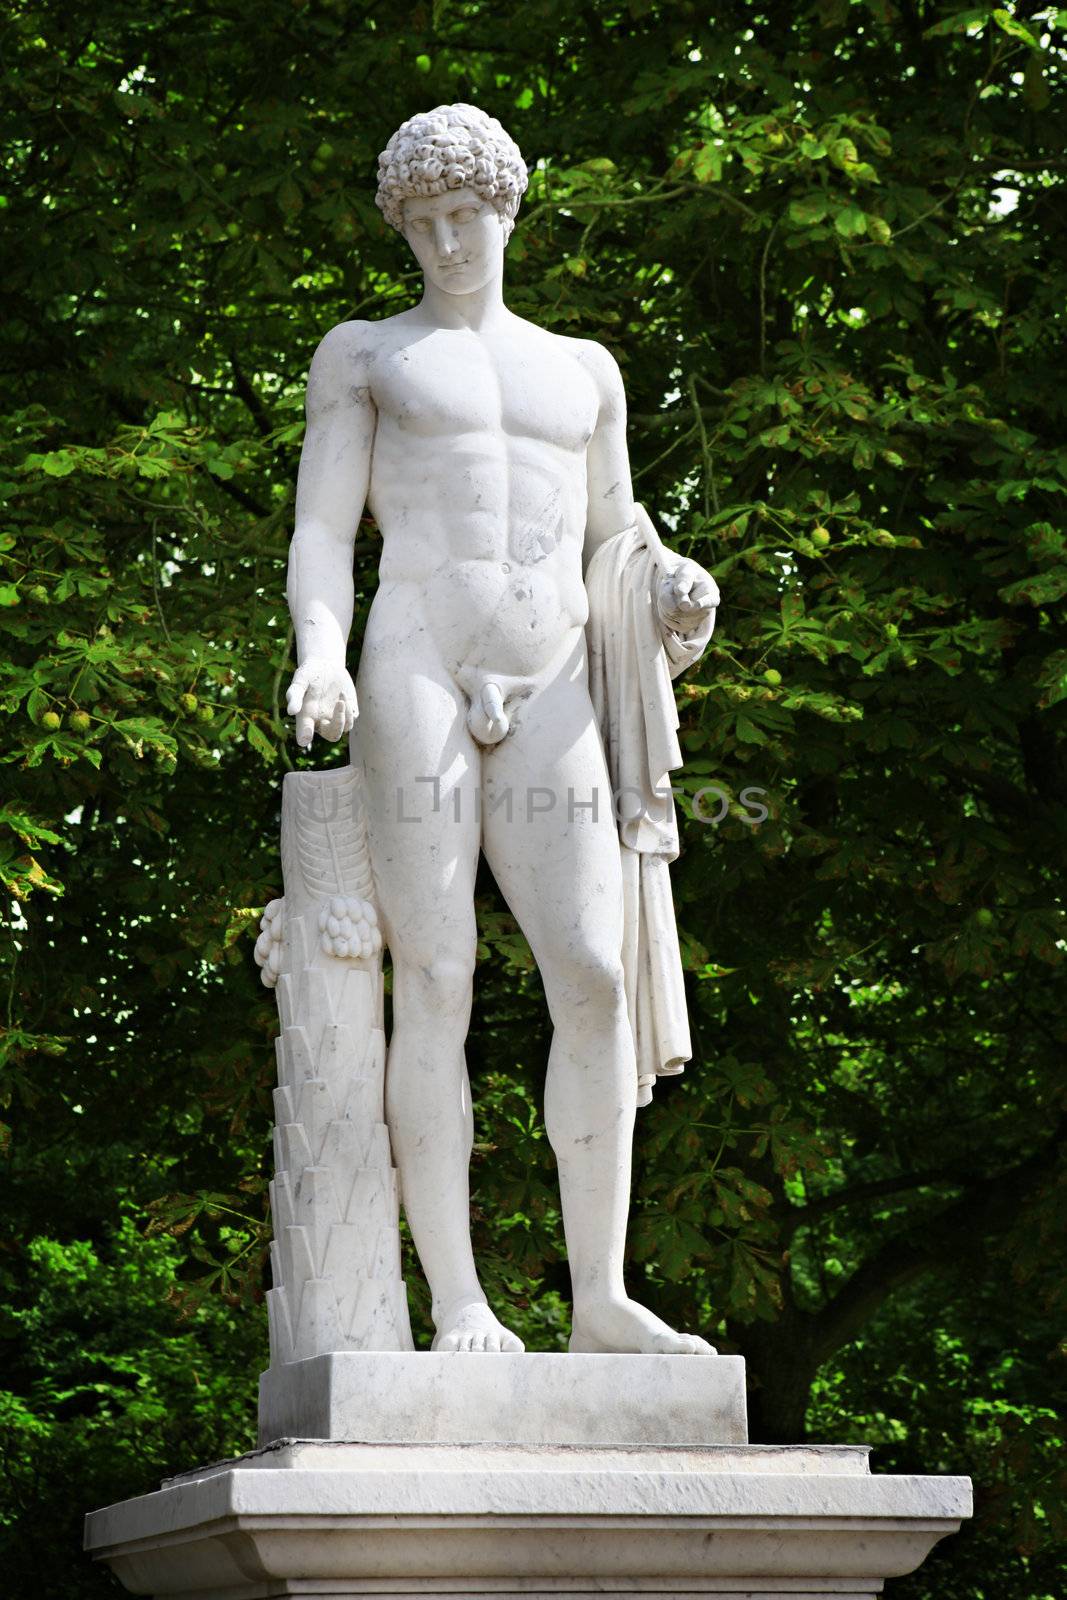 18th century statue in Sanssouci Park in Potsdam, Germany.
